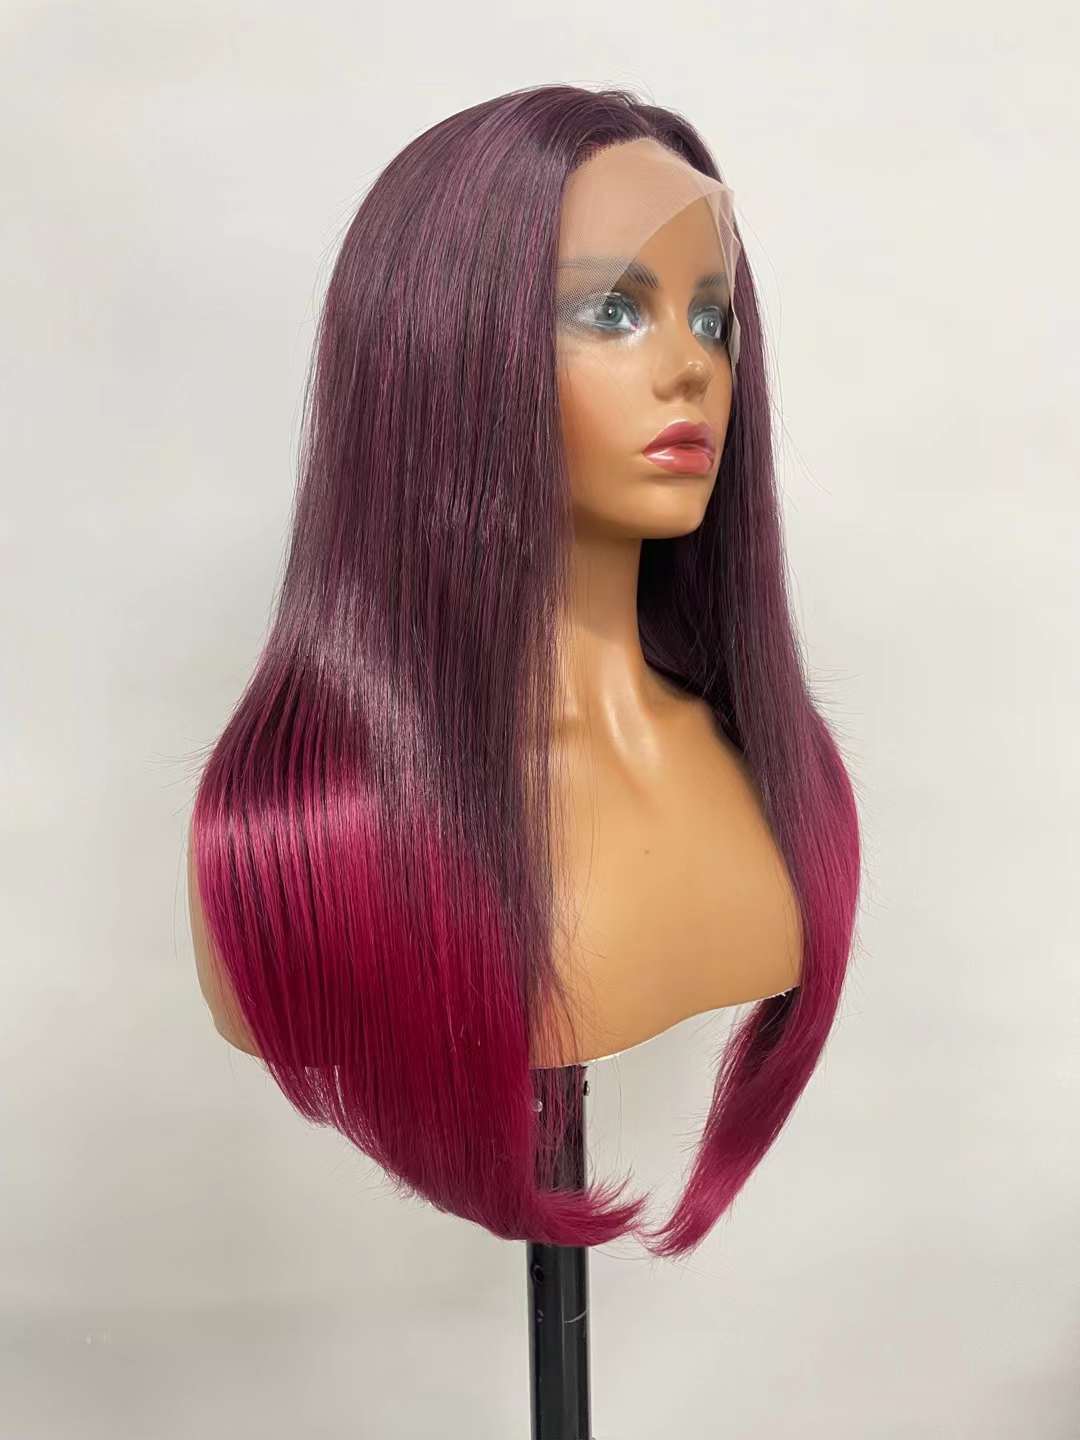 Special Purple Gradient Wine Long straight hair lace Wig LADY WIG